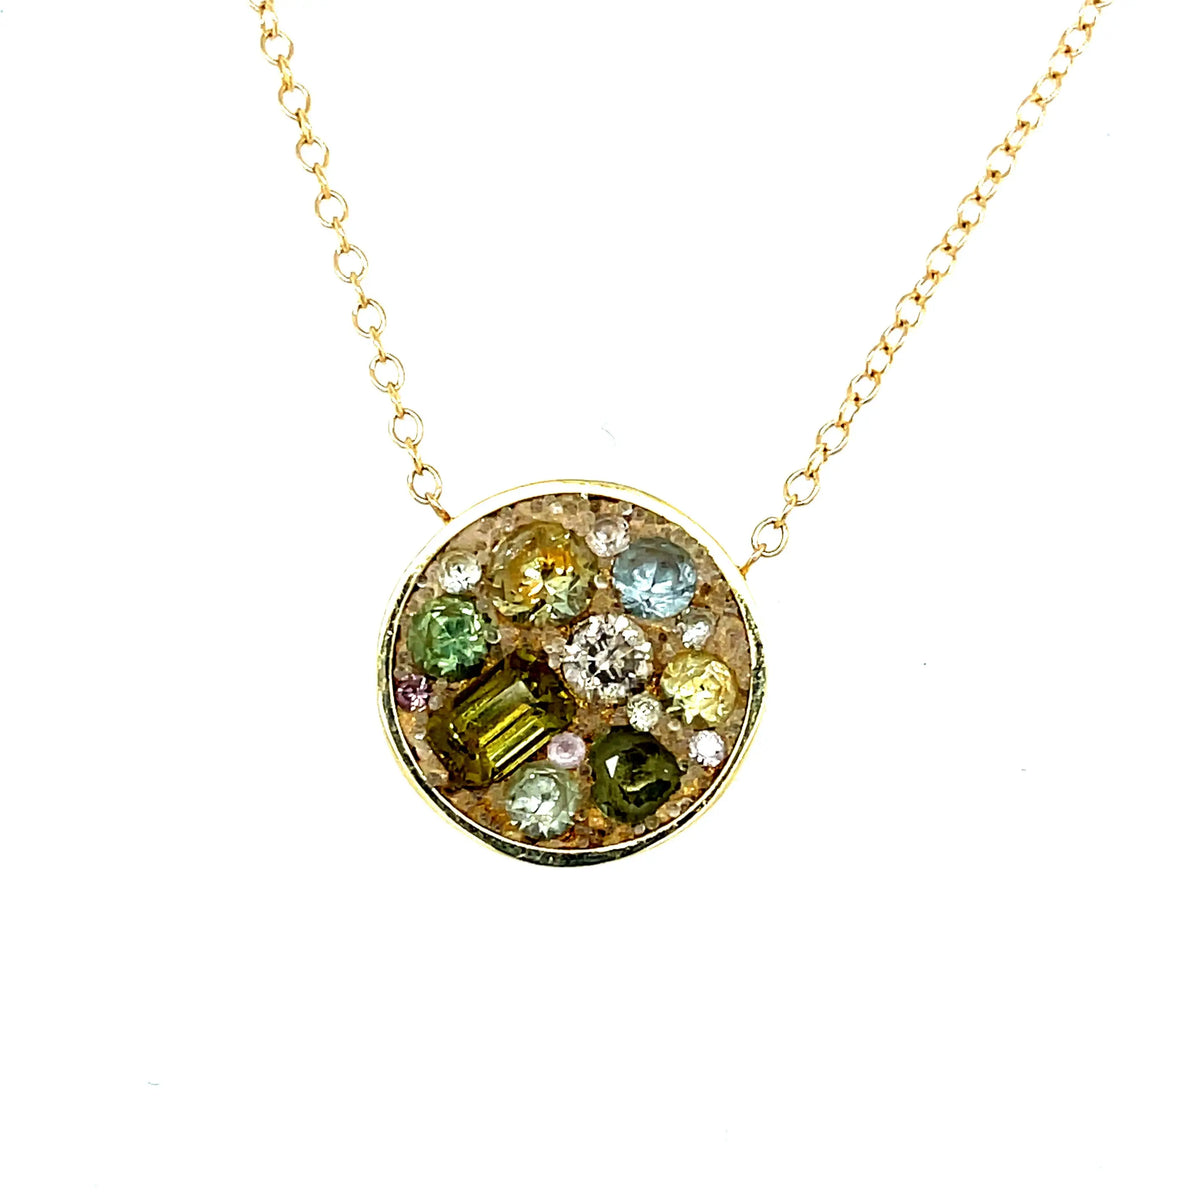 Large Circle Pendant with Chrysoberyl Sapphires and Diamonds on Chain - Squash Blossom Vail